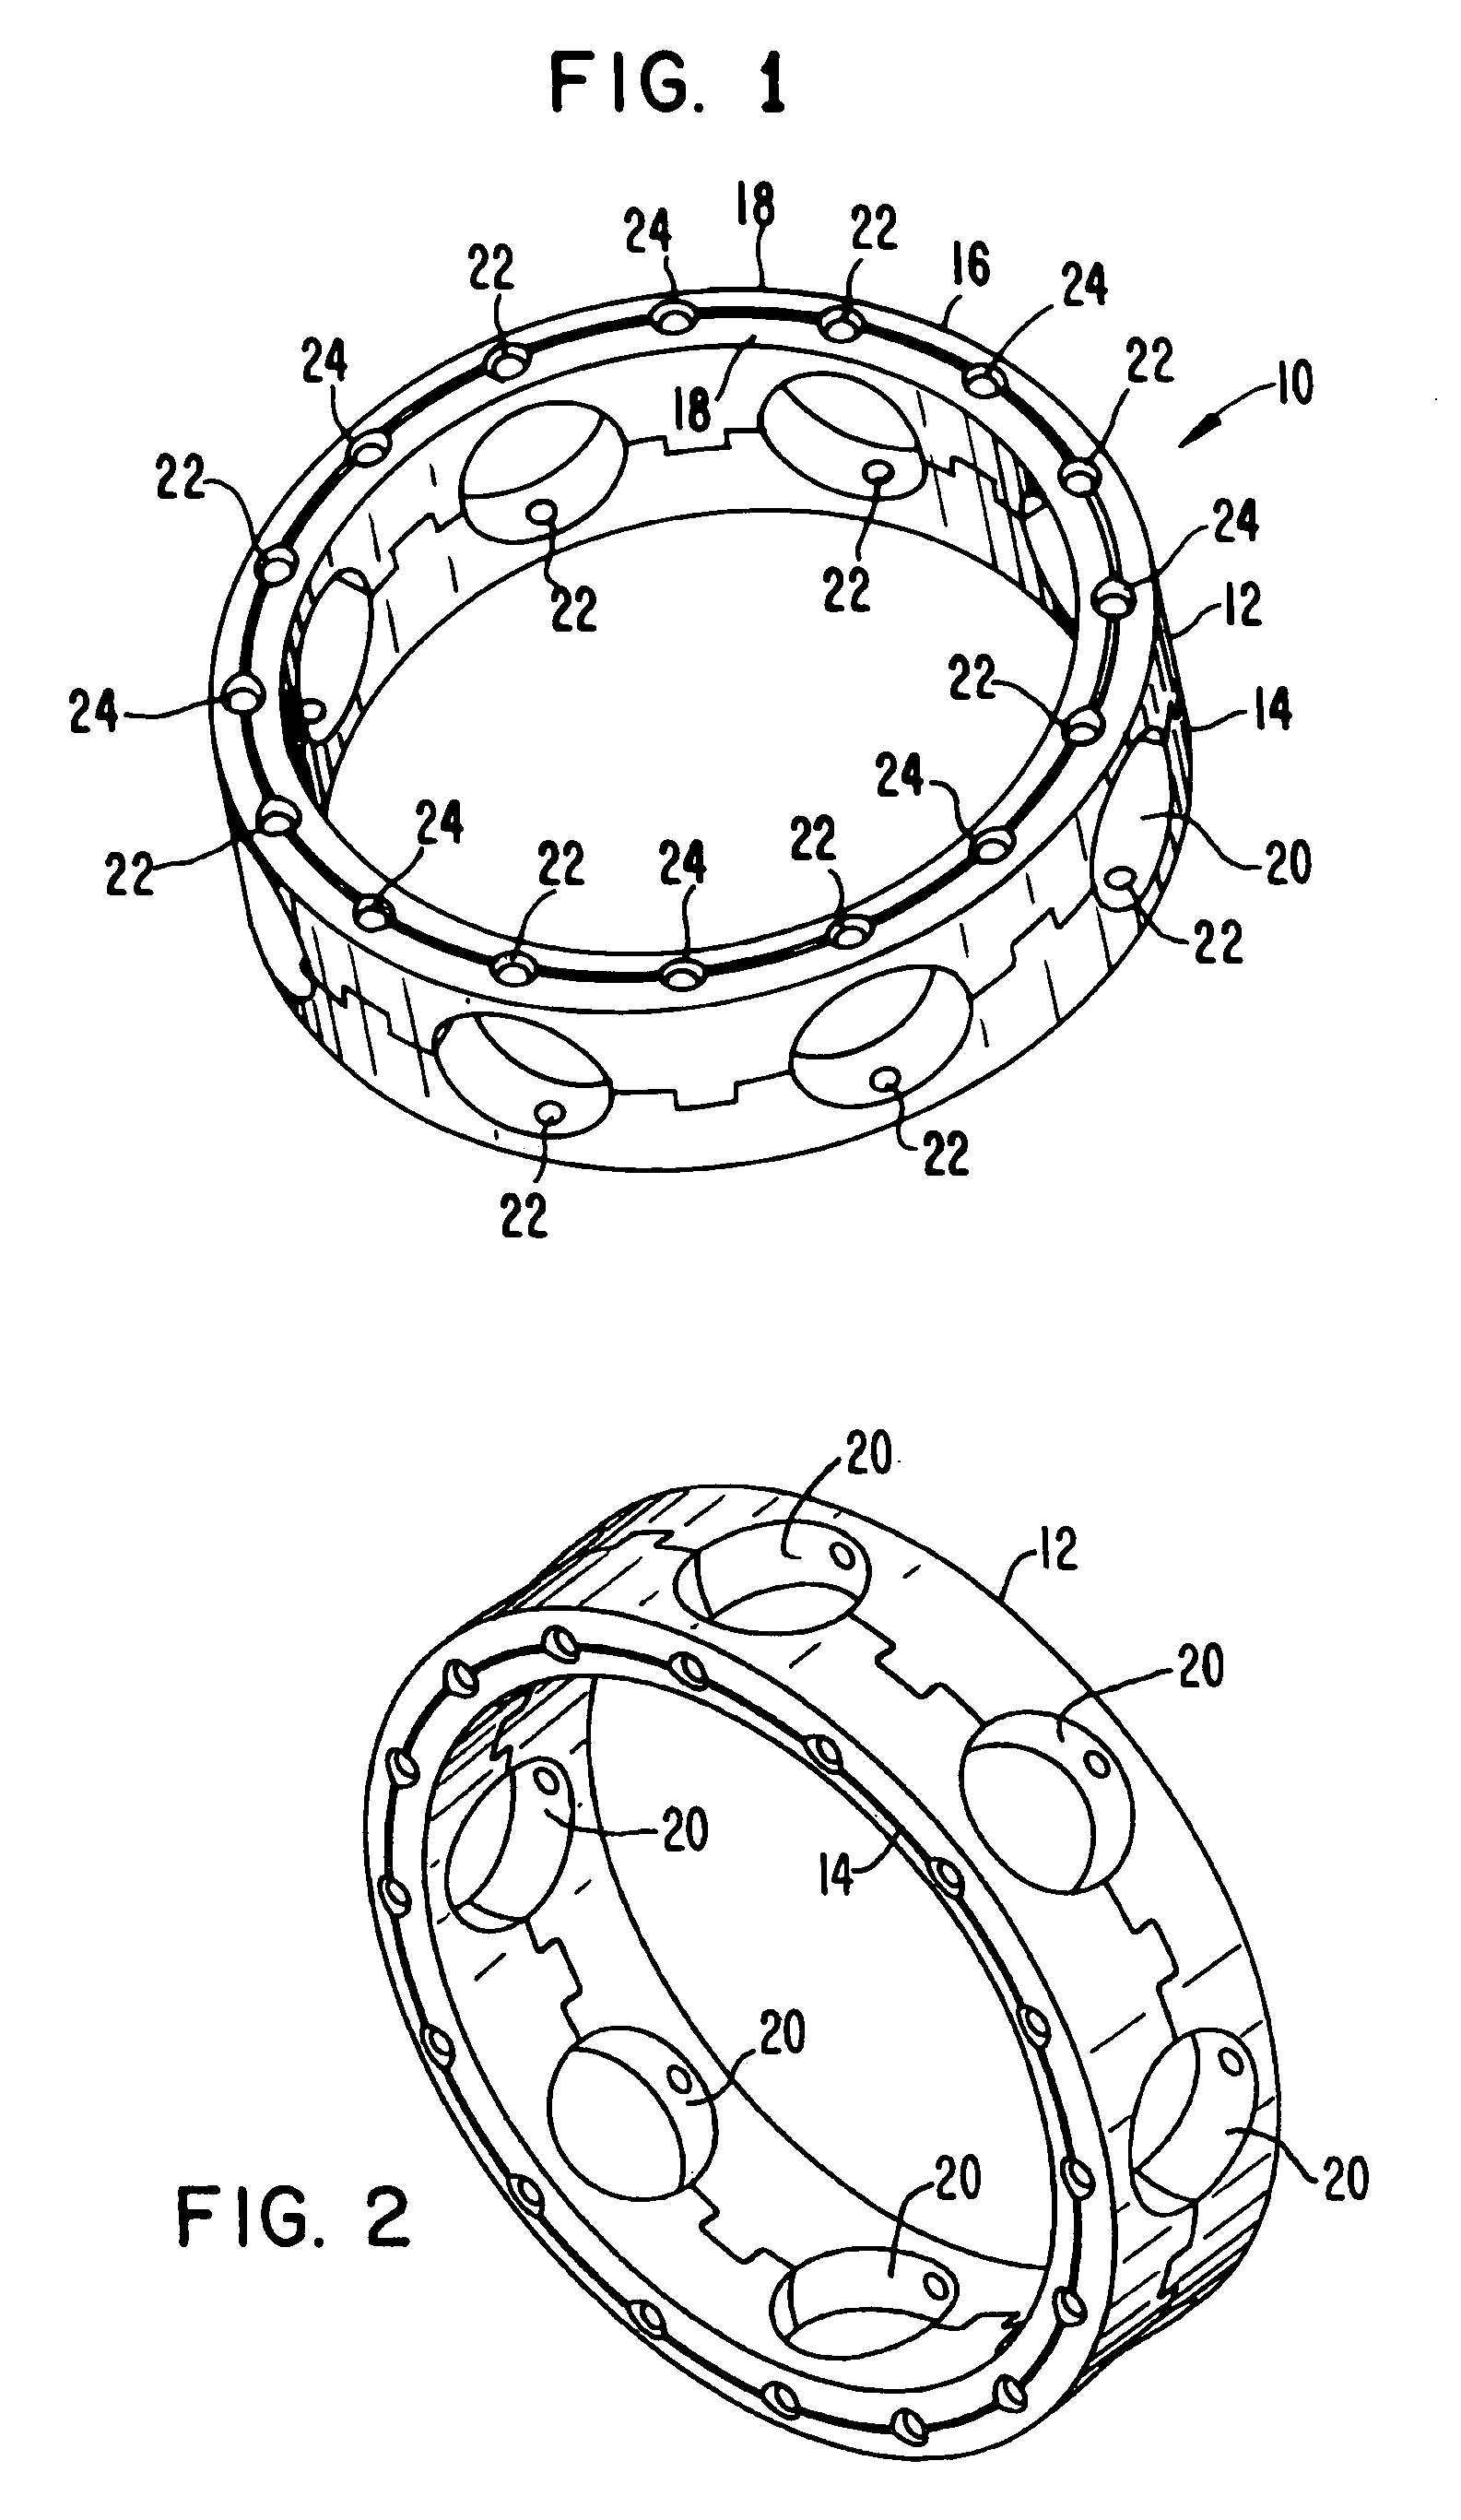 Bearing retainer assembly and method